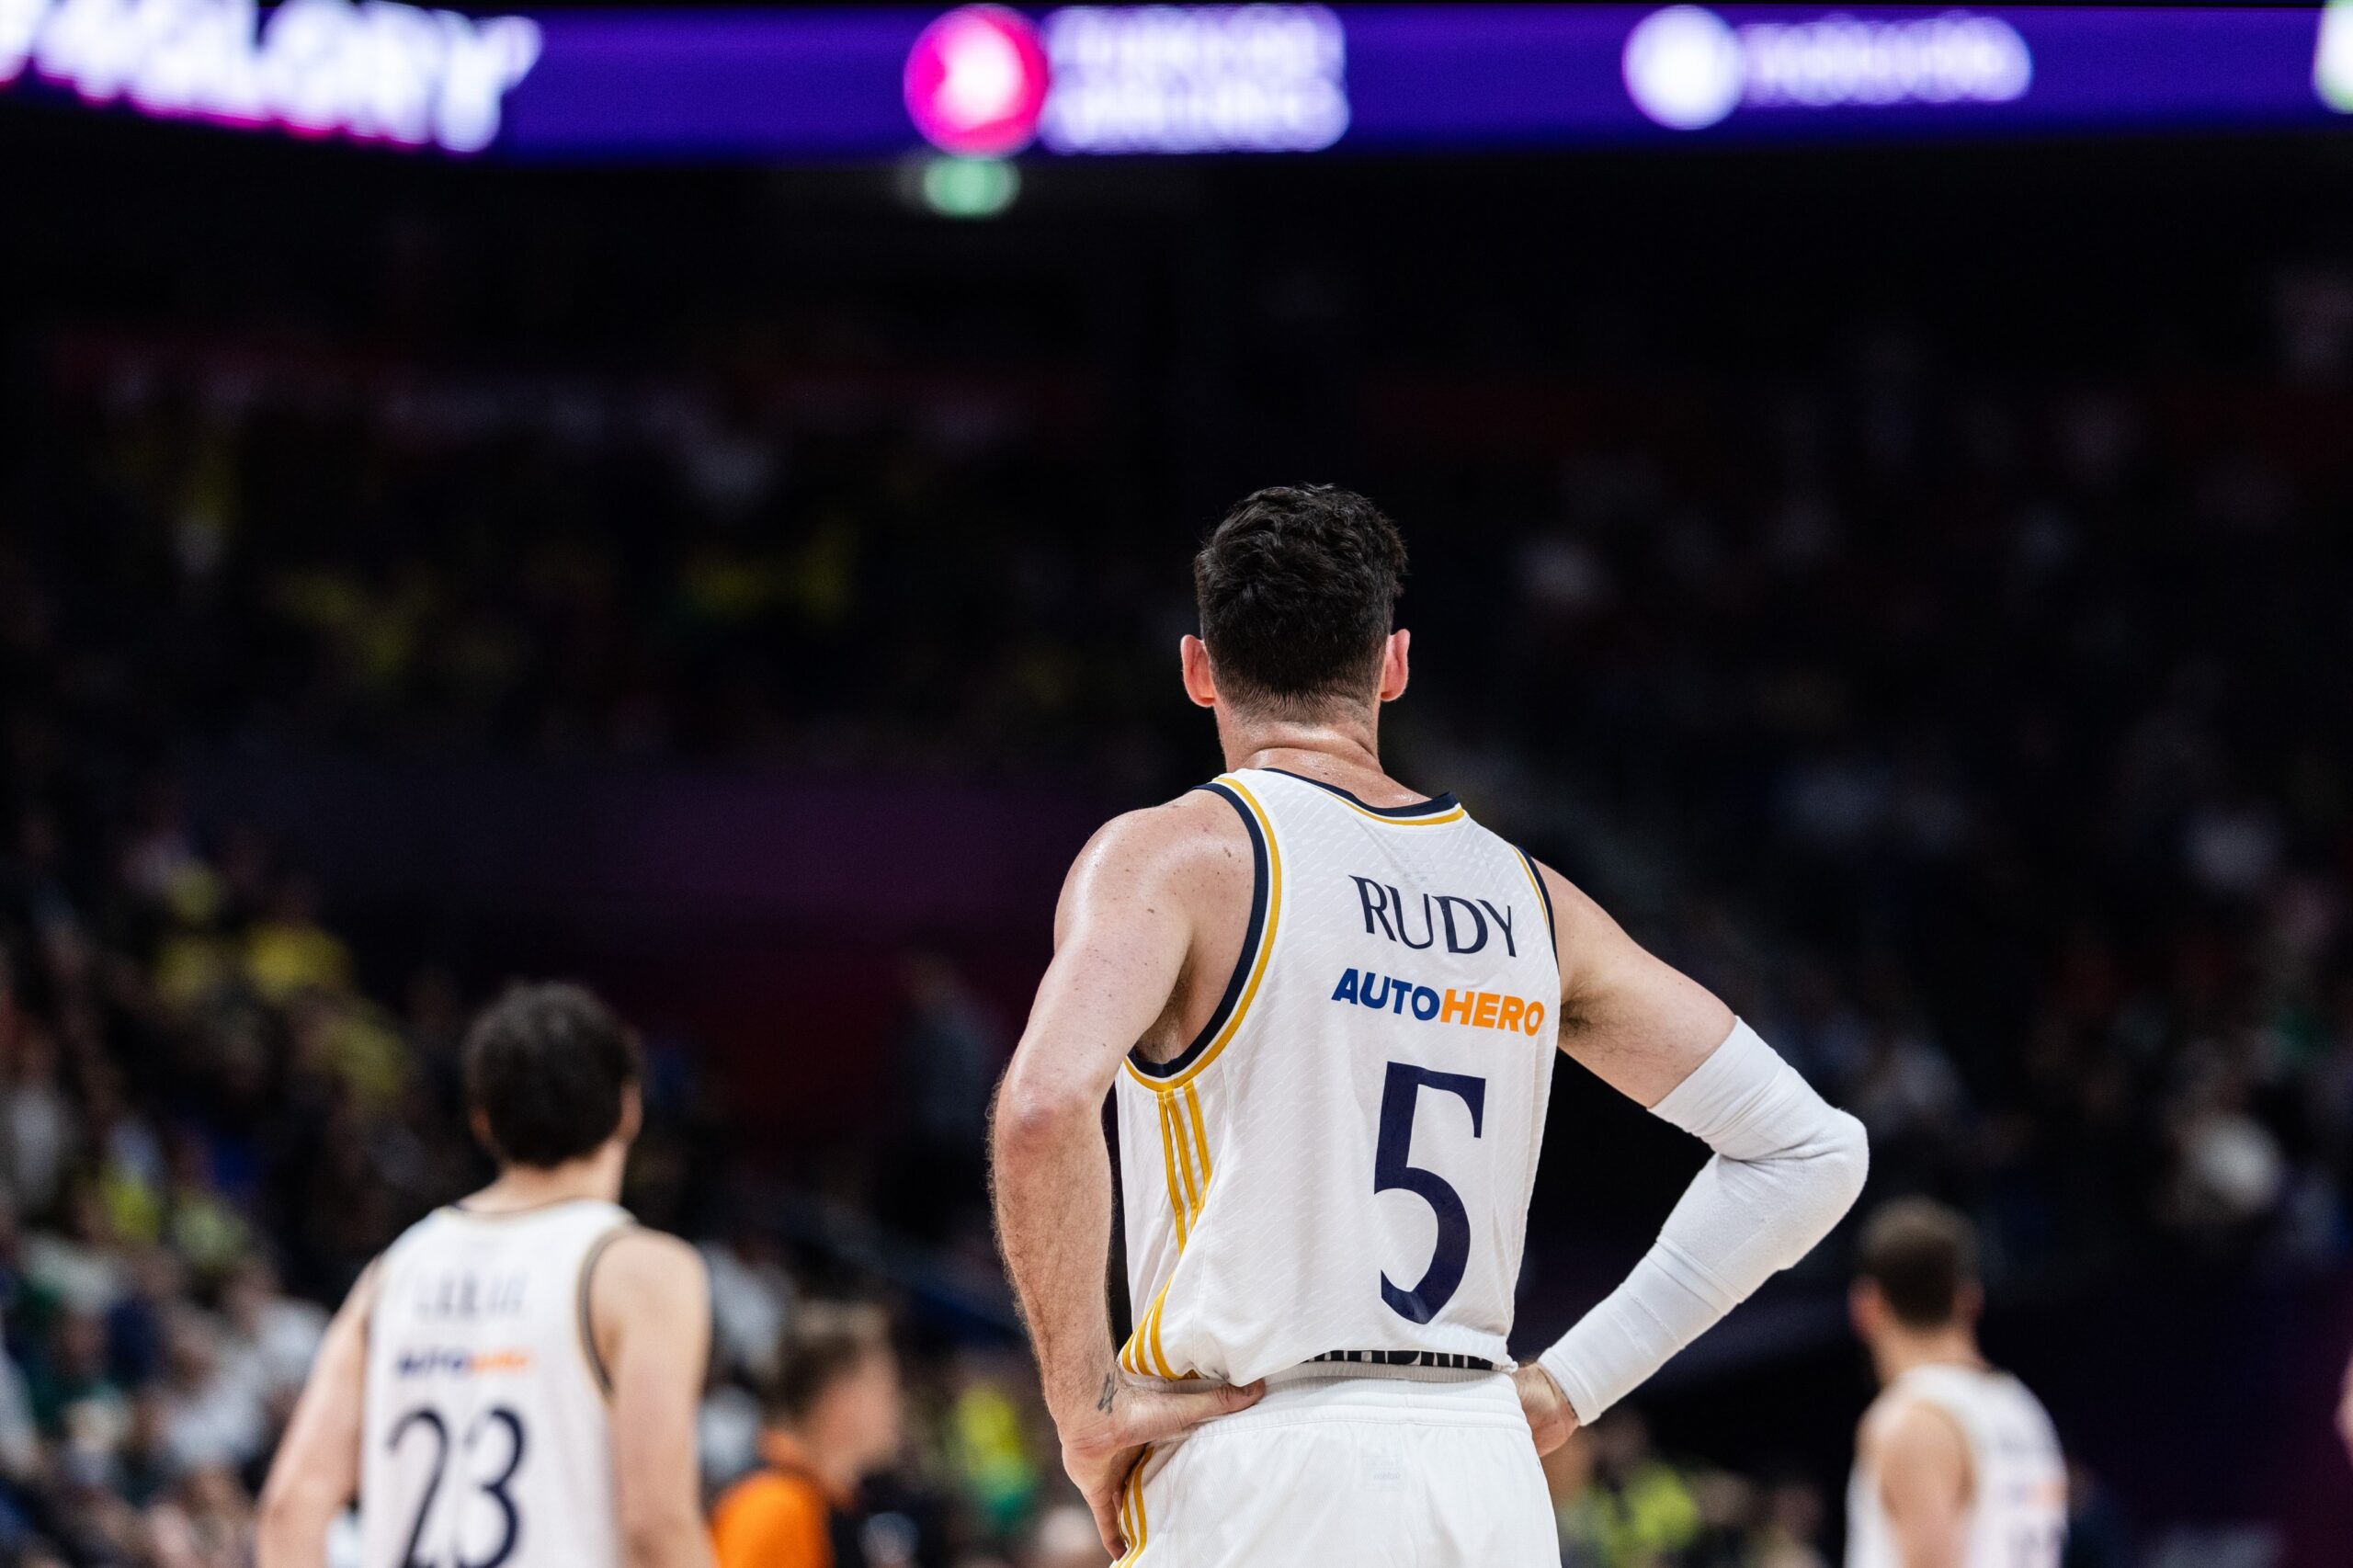 Rudy Fernandez of Real Madrid became the all-time leader in steals in the Euroleague Final Four in his final ever Euroleague game.